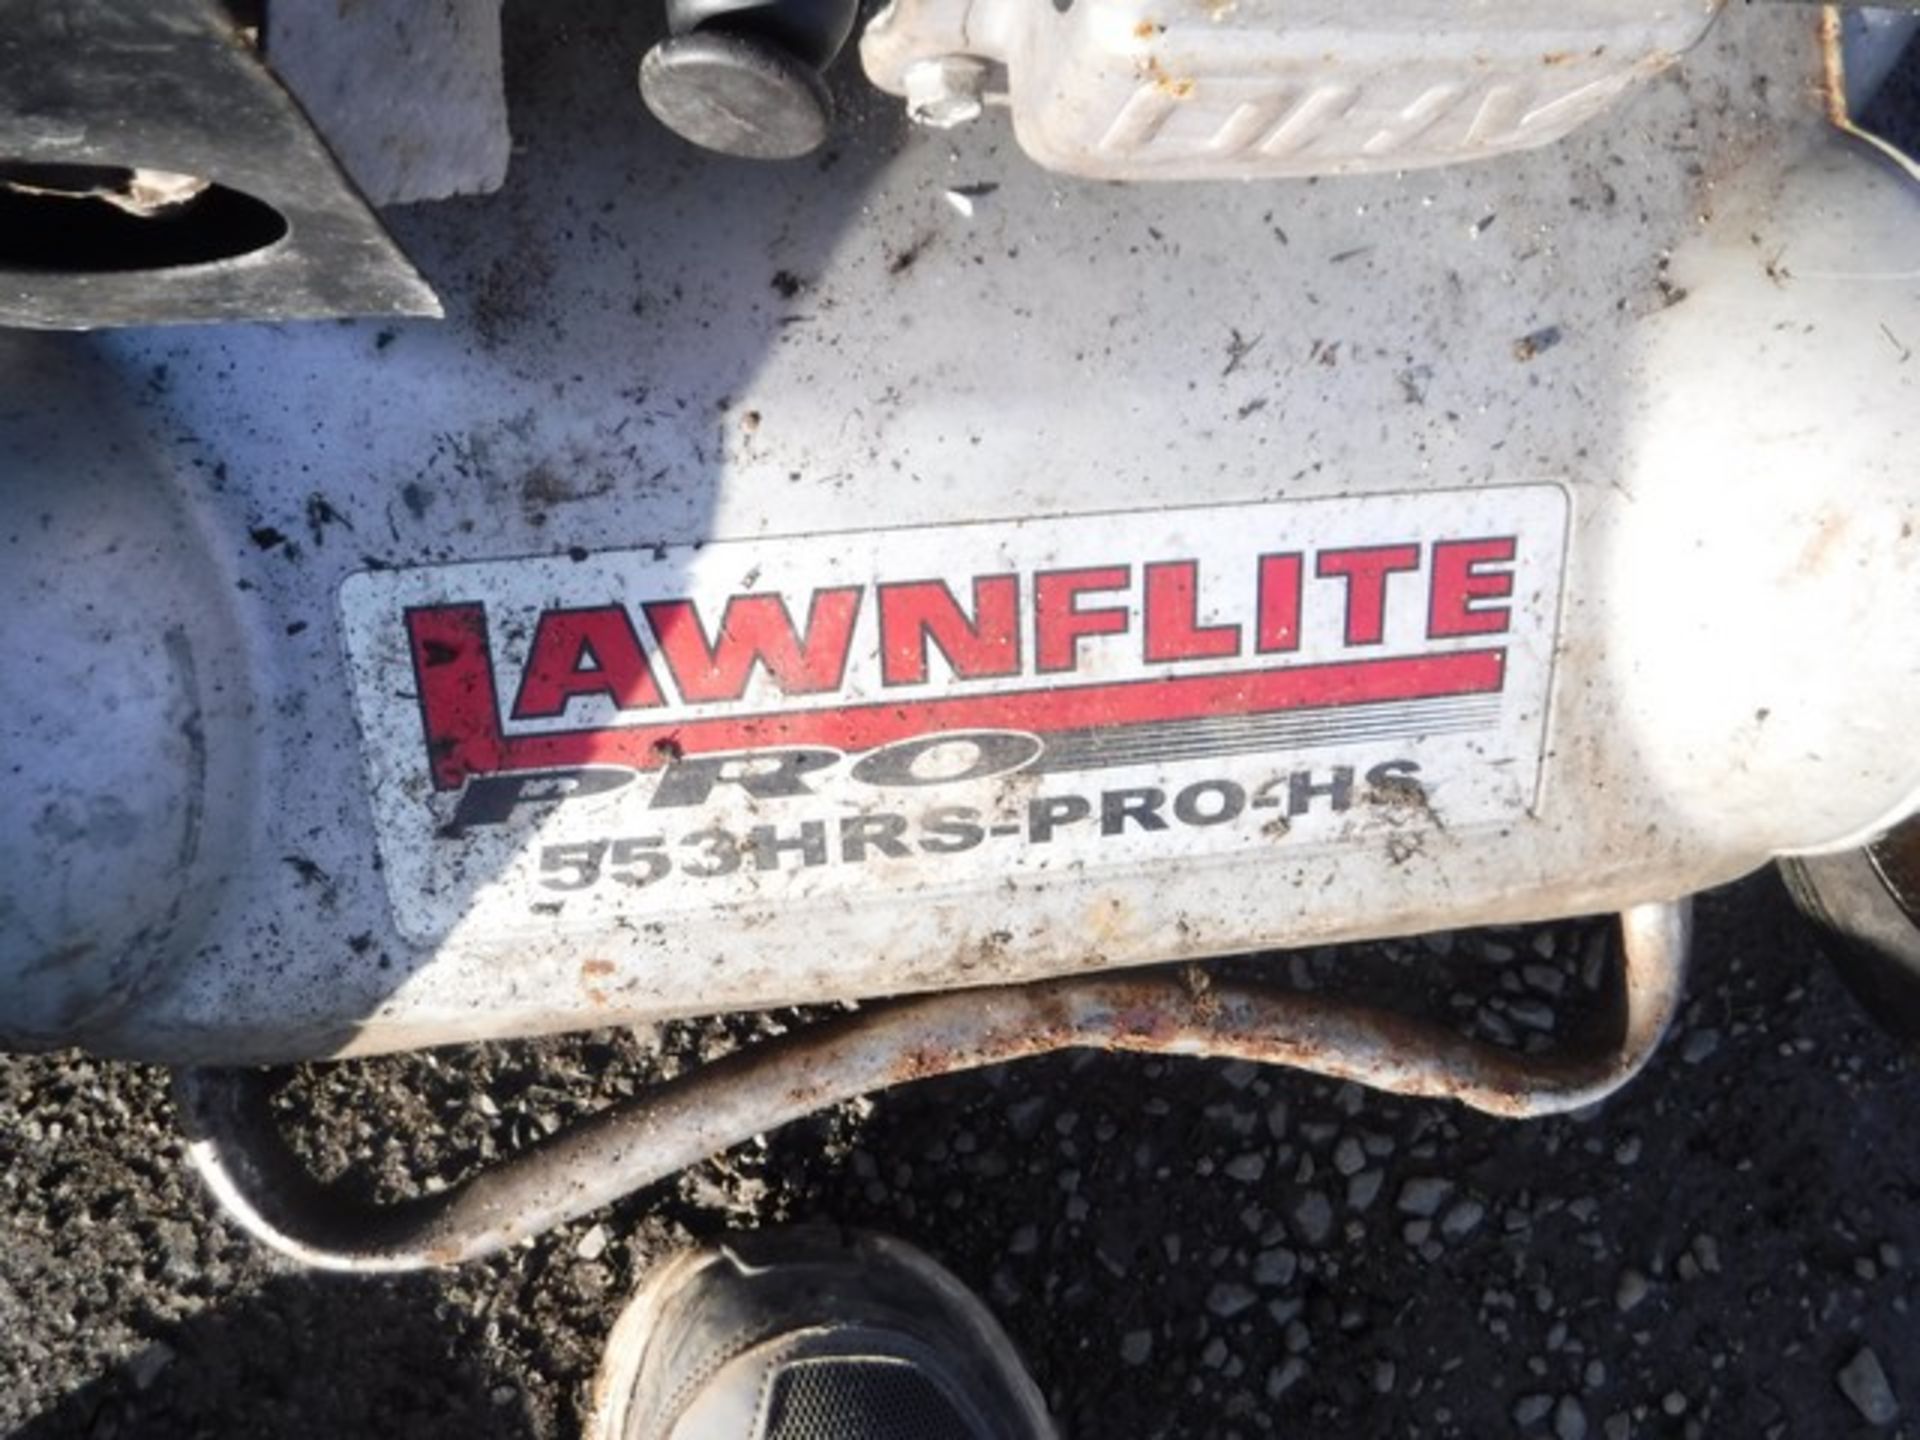 LAWNFLITE PRO S53 x4 AND HONDA GXV160 ENGINE PLUS 2 BASKETS